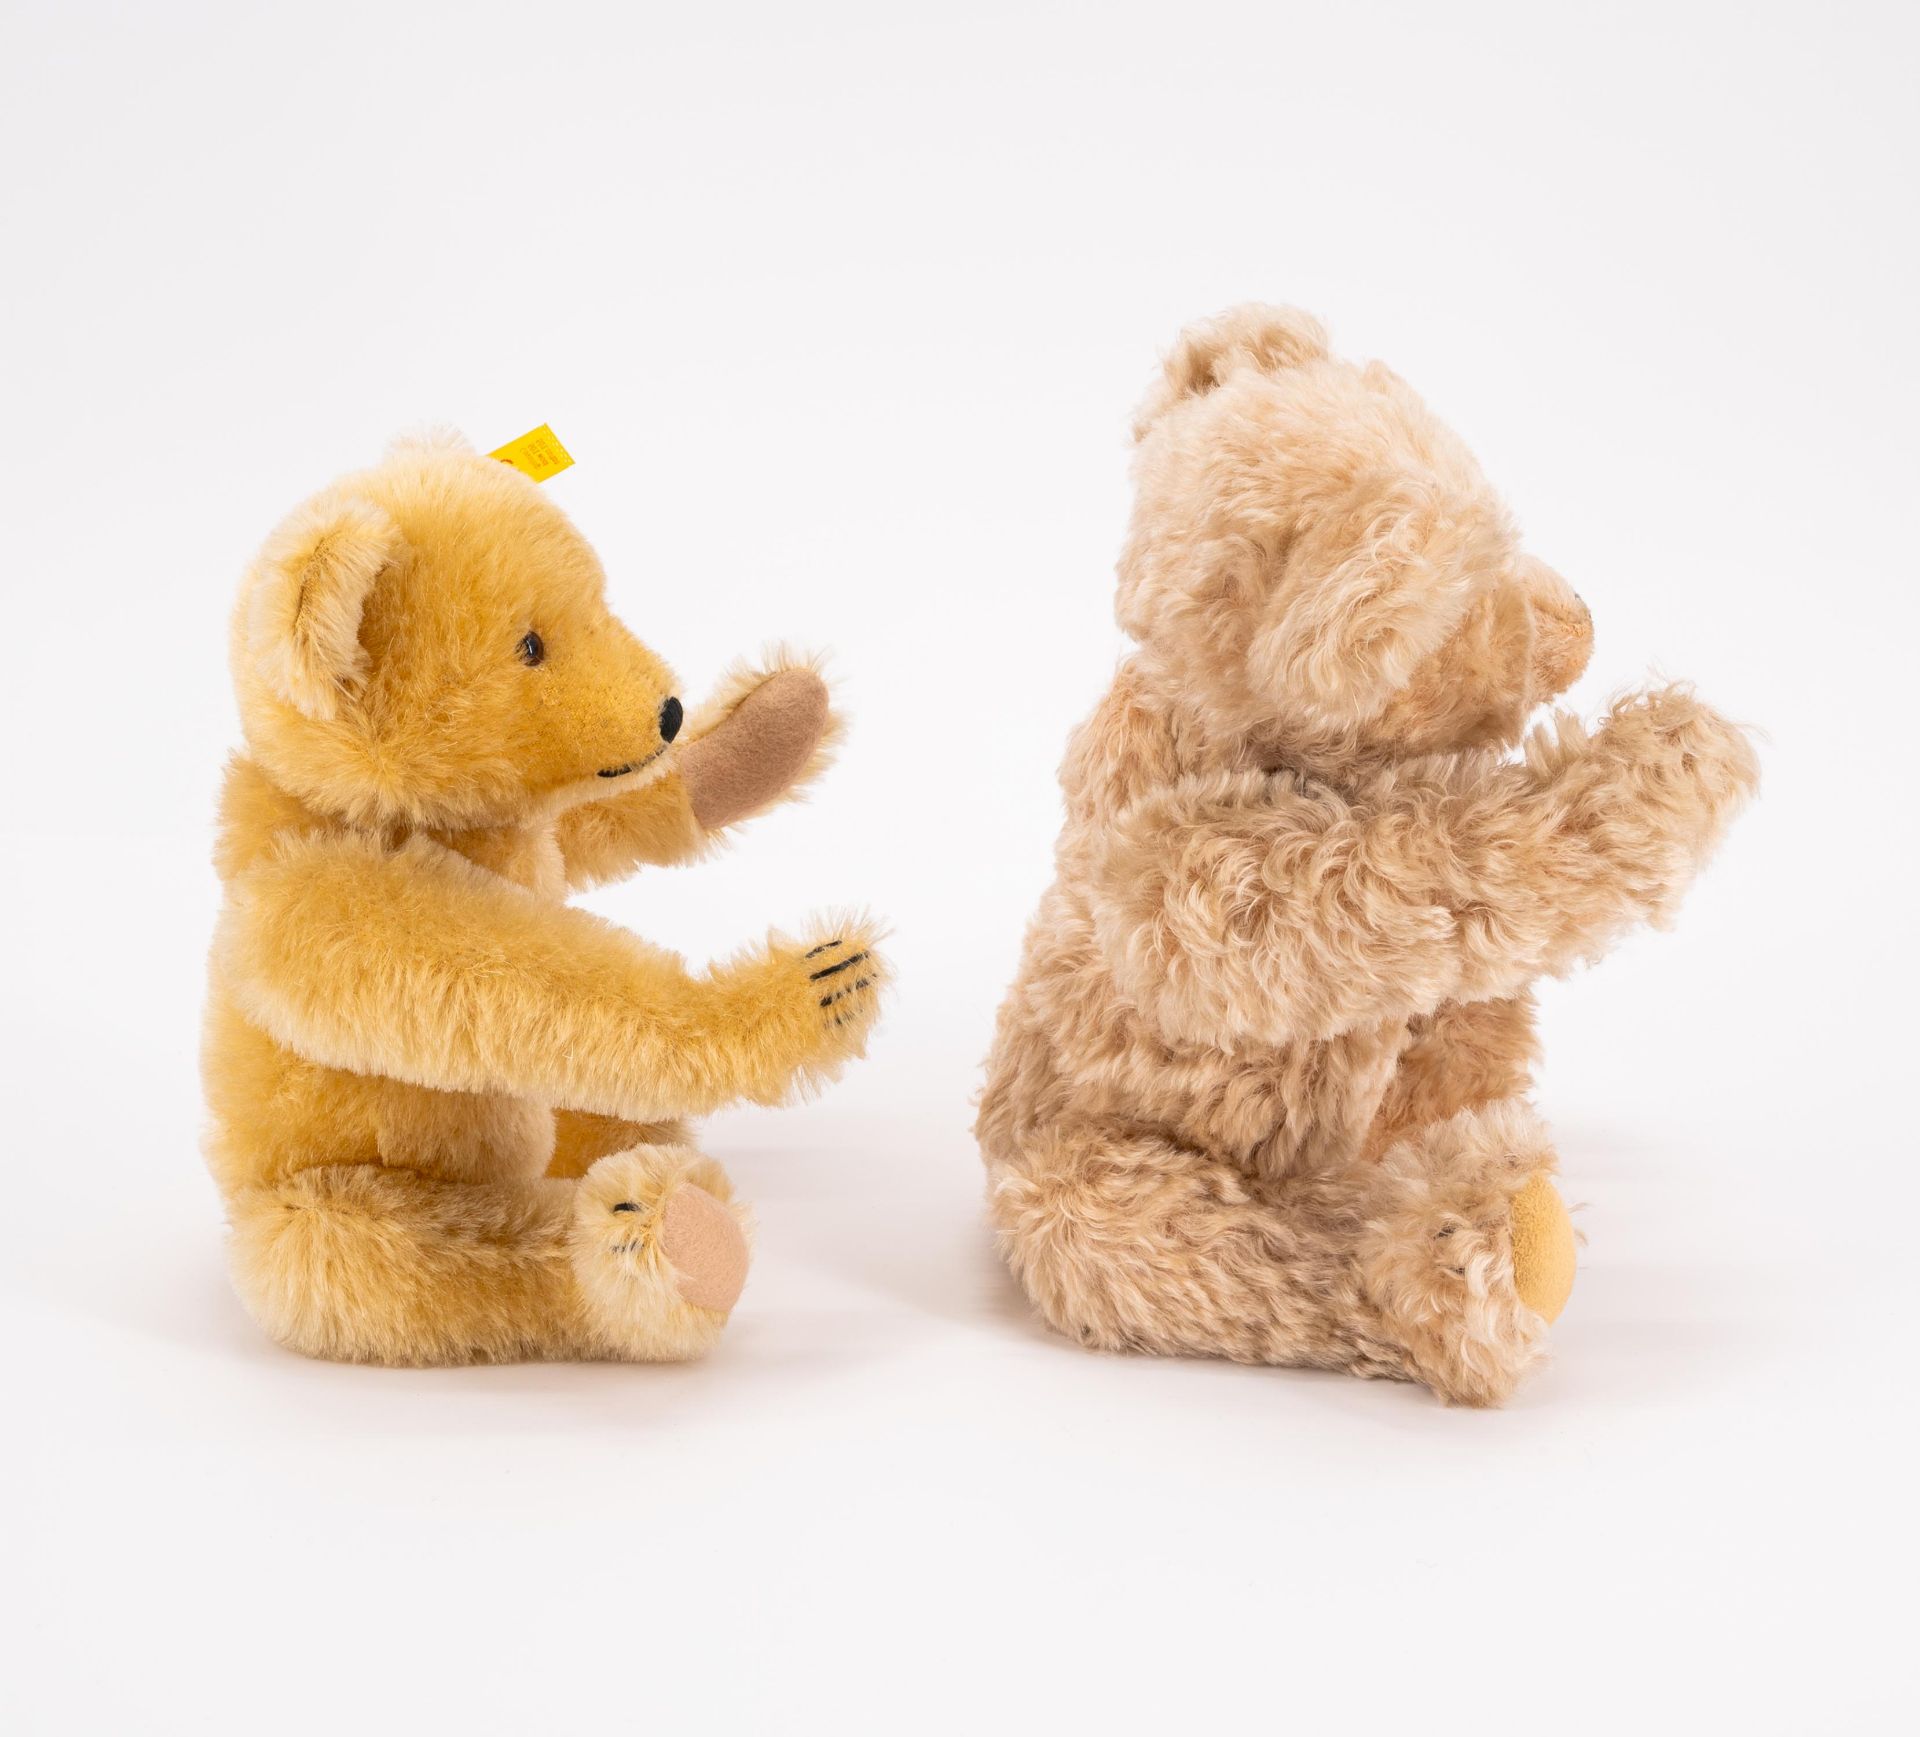 Steiff: TWO STEIFF BEARS FROM COLLECTORS EDITIONS MADE OF MOHAIR PLUSH, WOOL AND GLASS - Image 4 of 8